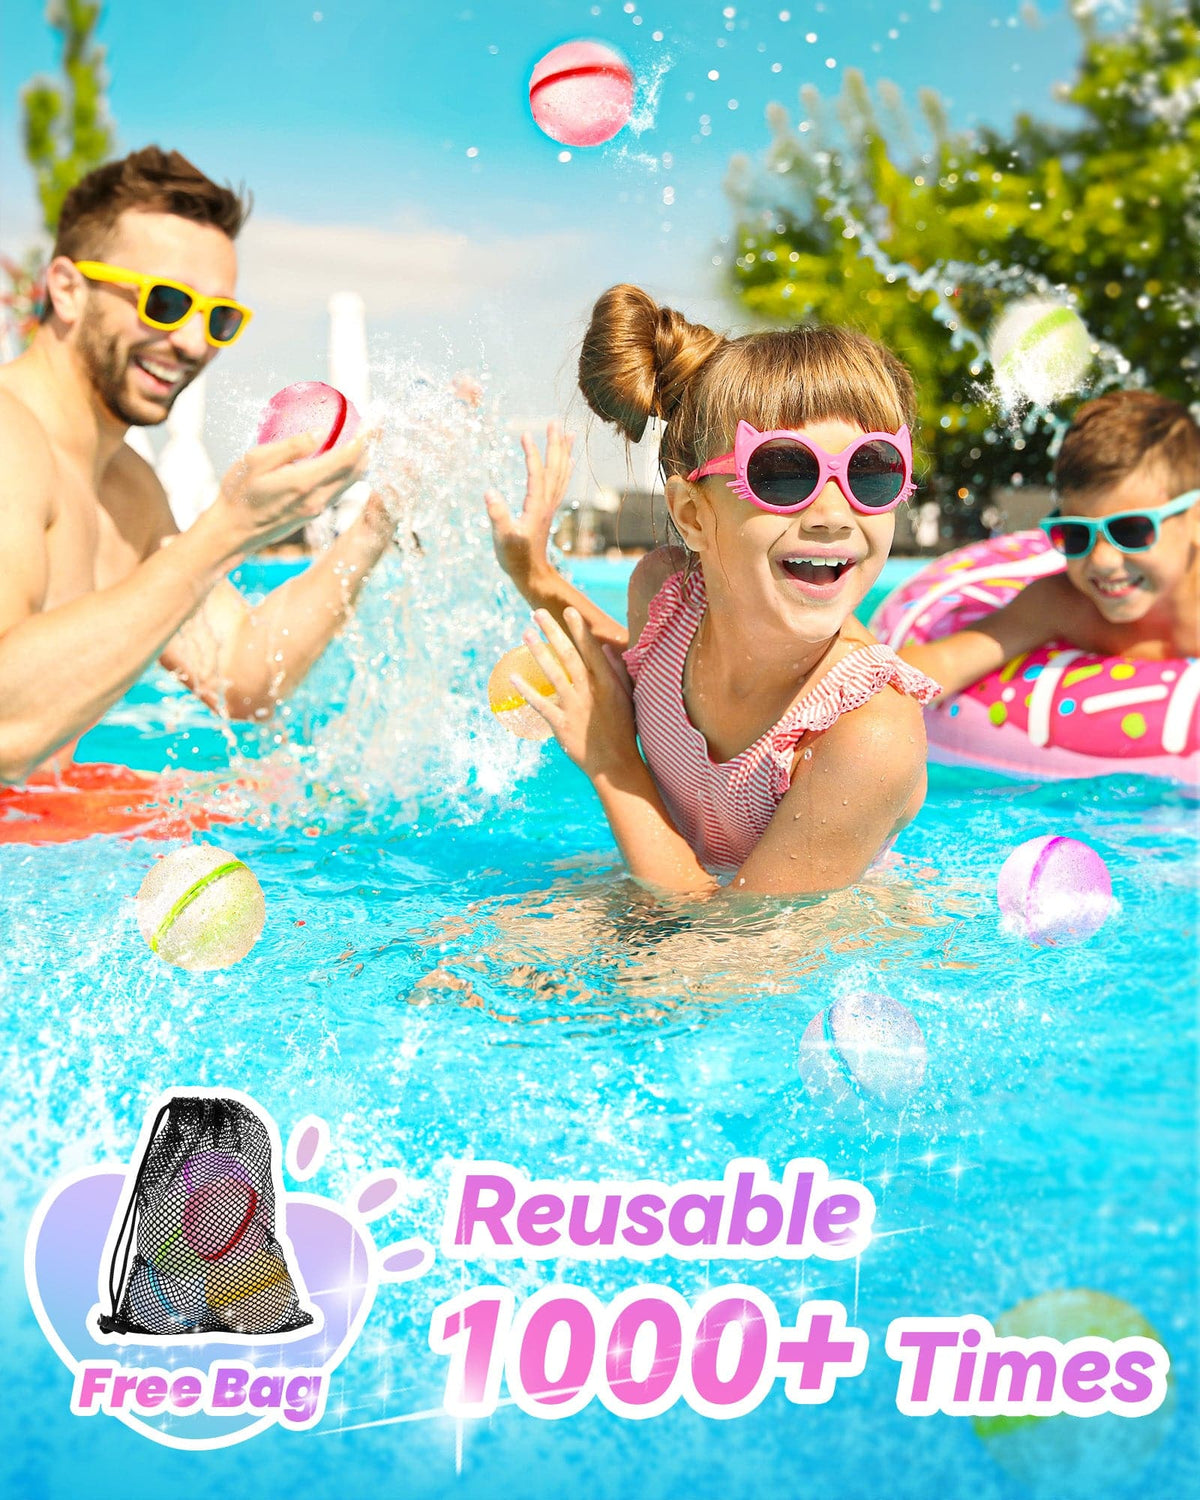 reusable water balloons, water balloons, refill water balloons, magnetic water balloons, water bombs, water fight, summer fun, games with water balloons, water balloons fight, water balloon games for adults, refillable water balloon, how to fill water balloon, balloon party idea, birthday party